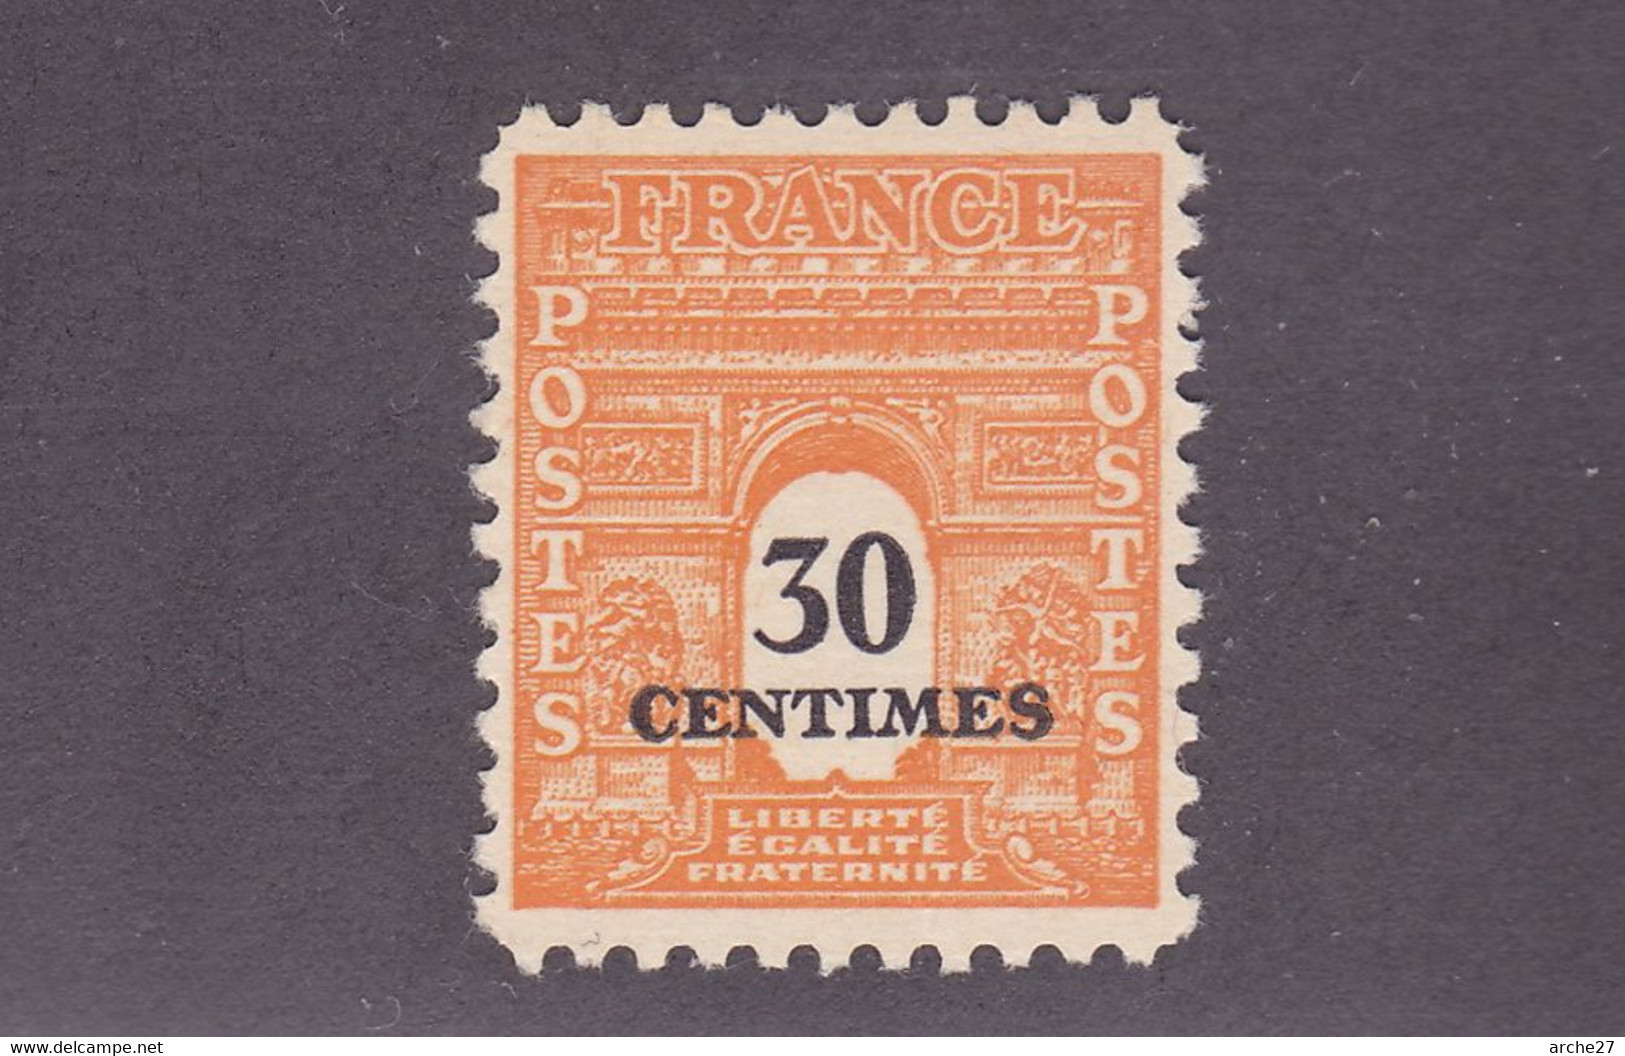 TIMBRE FRANCE N° 702 NEUF ** - Nuovi